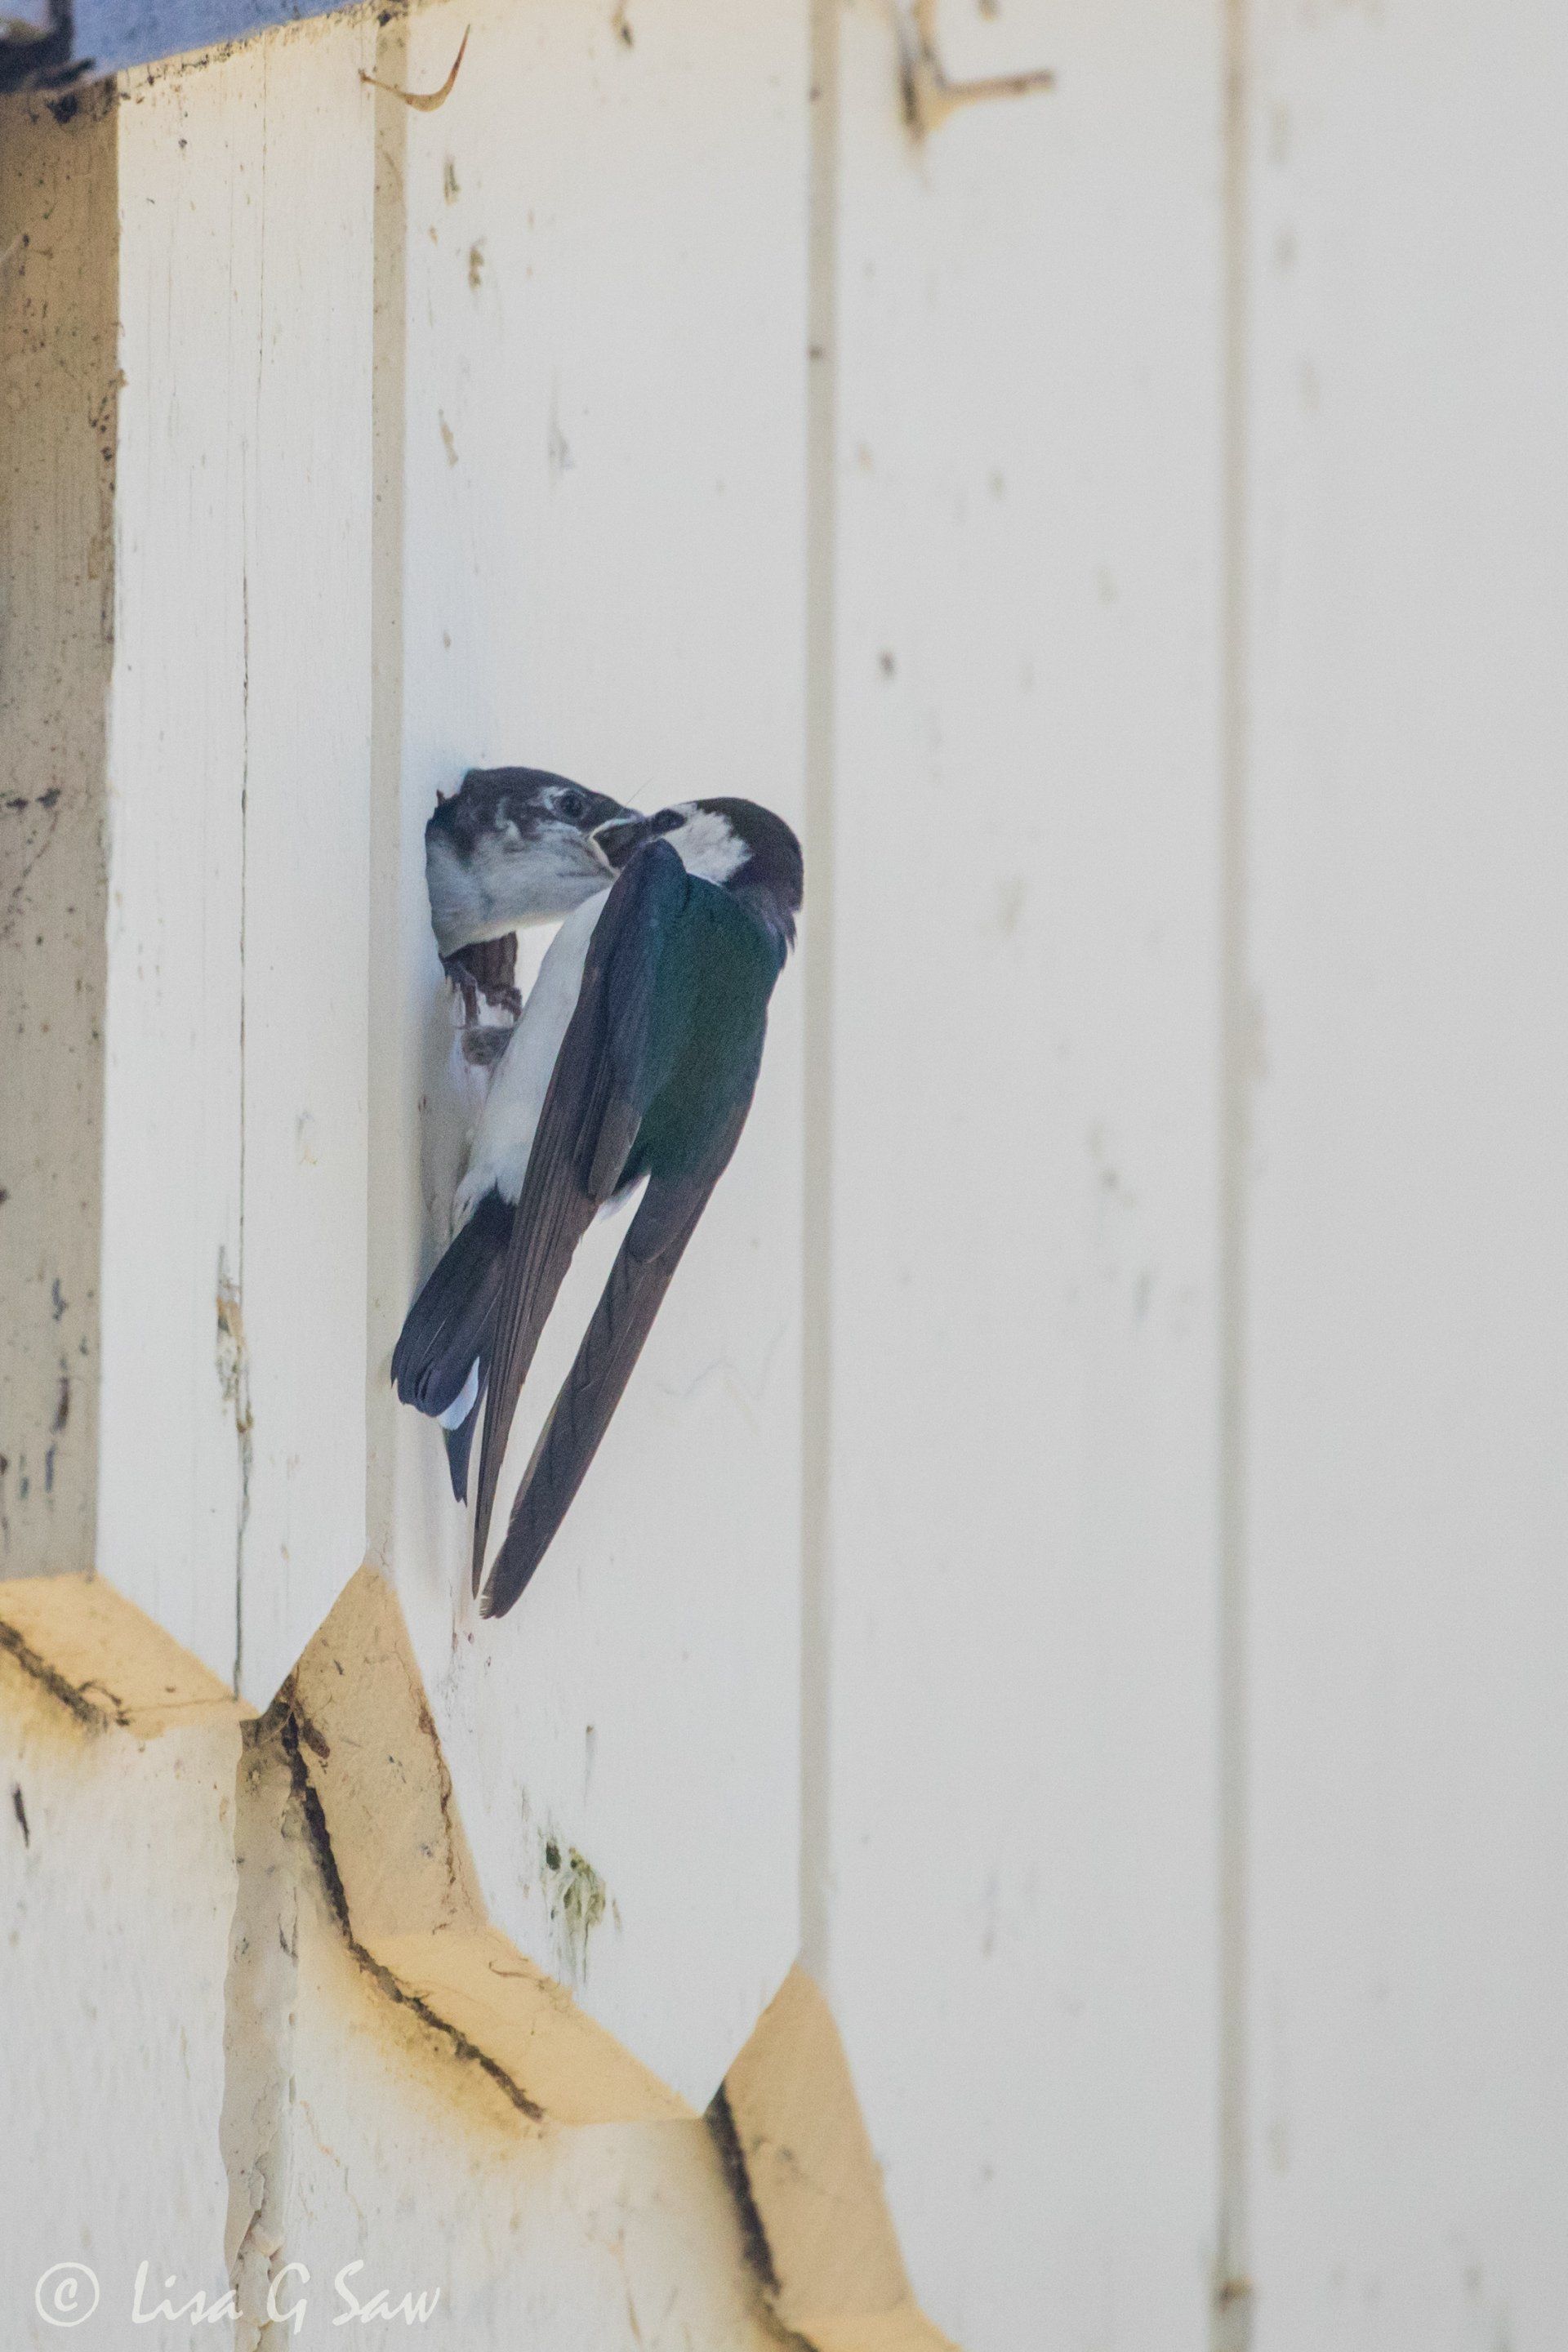 Adult Violet-Green Swallow feeding a chick through a hole in wall